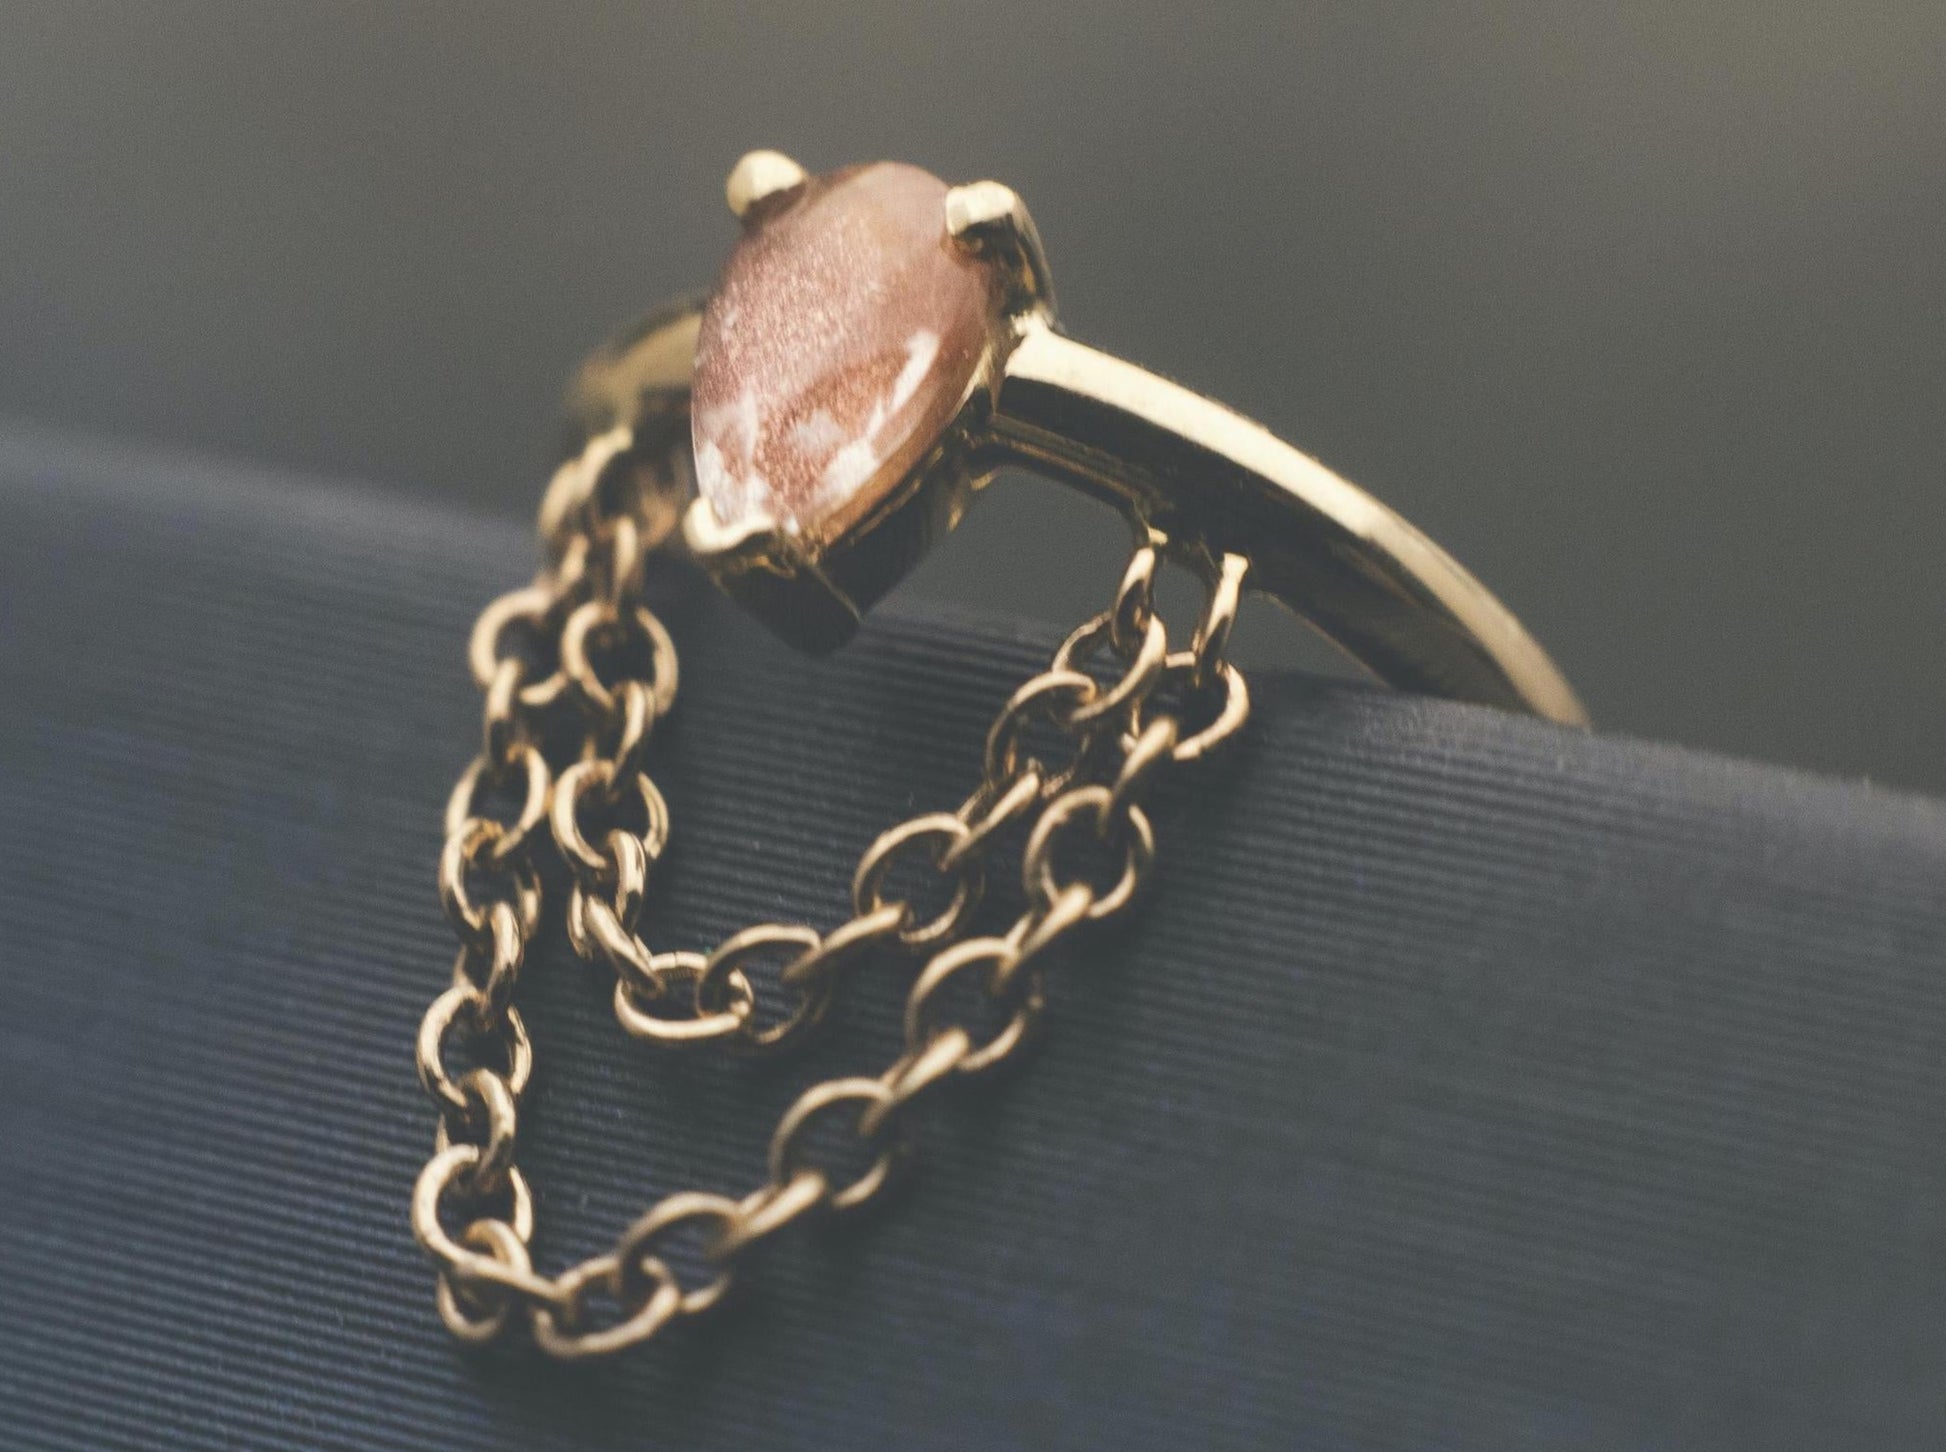 Call Me! Seam Ring 16g 5/16" with Oregon Sunstone in 14k Yellow Gold by BVLA